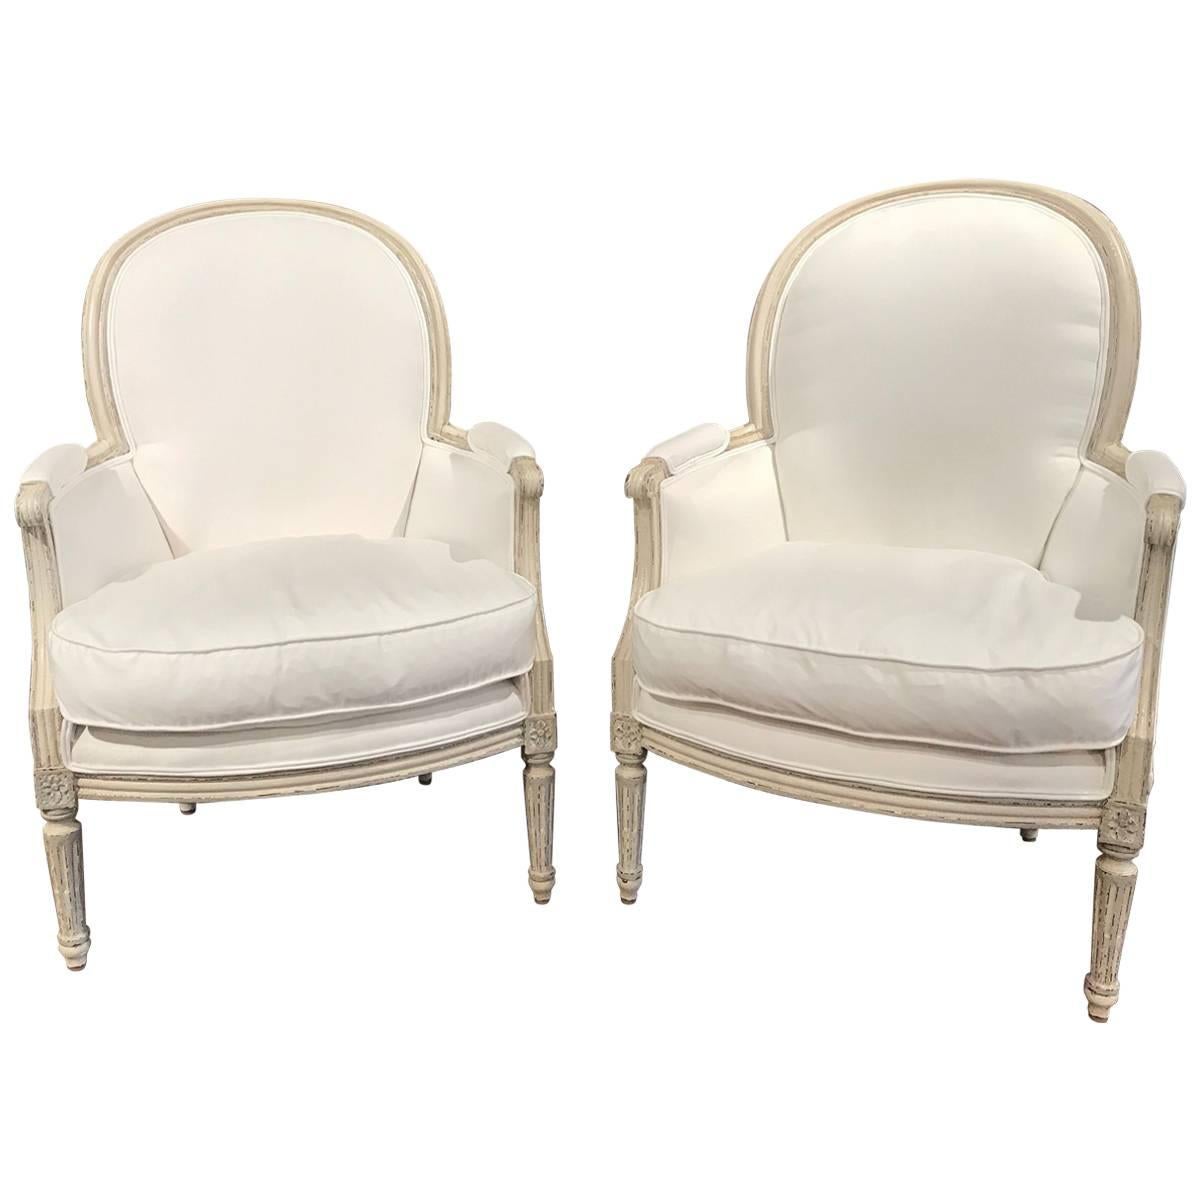 Pair of 19th Century French Louis XVI Carved Painted Bergère Armchairs